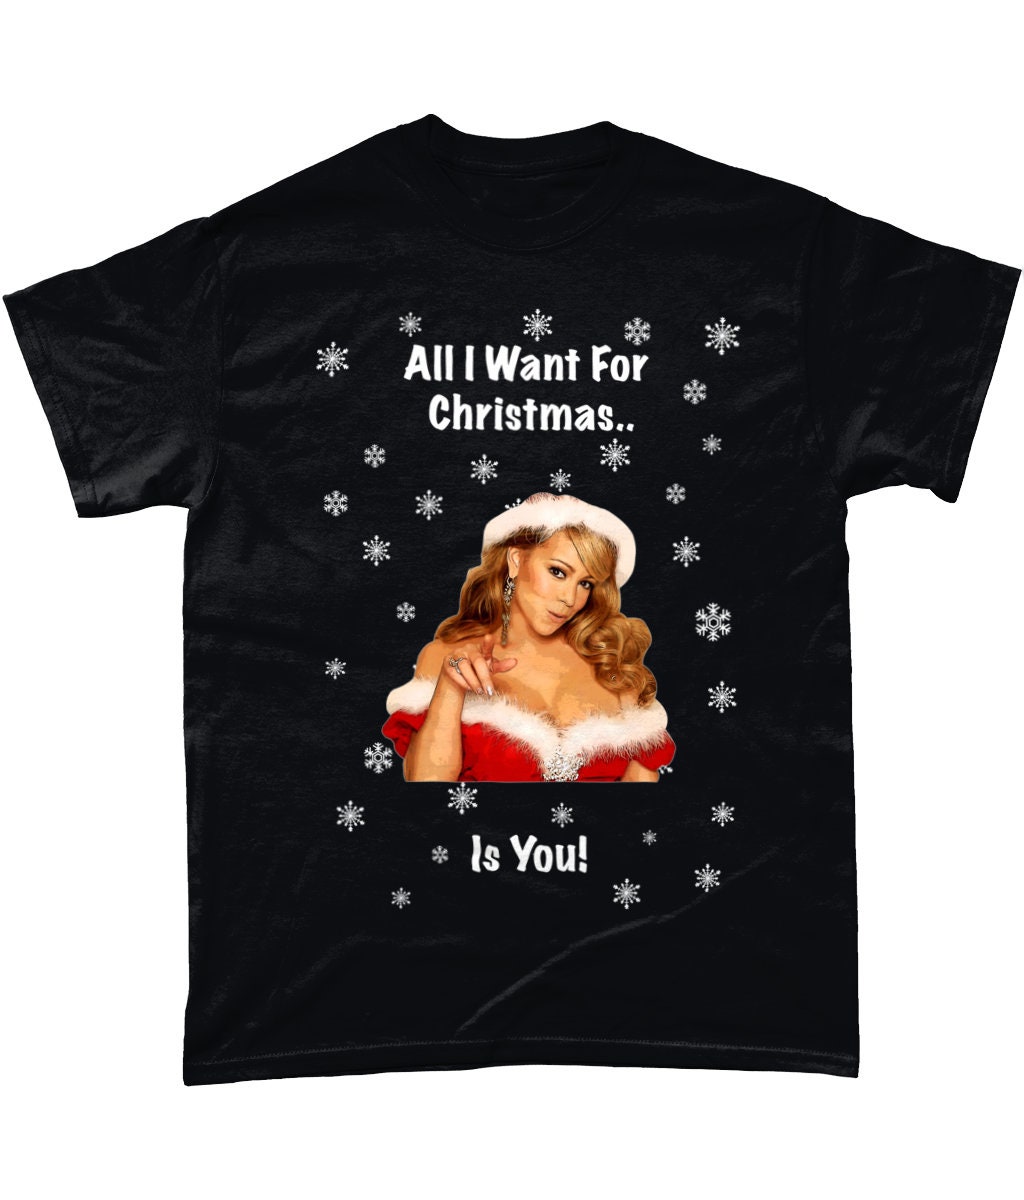 Discover Funny Christmas T-Shirt Mariah Carey All I Want For Christmas Is You Xmas Party Wear